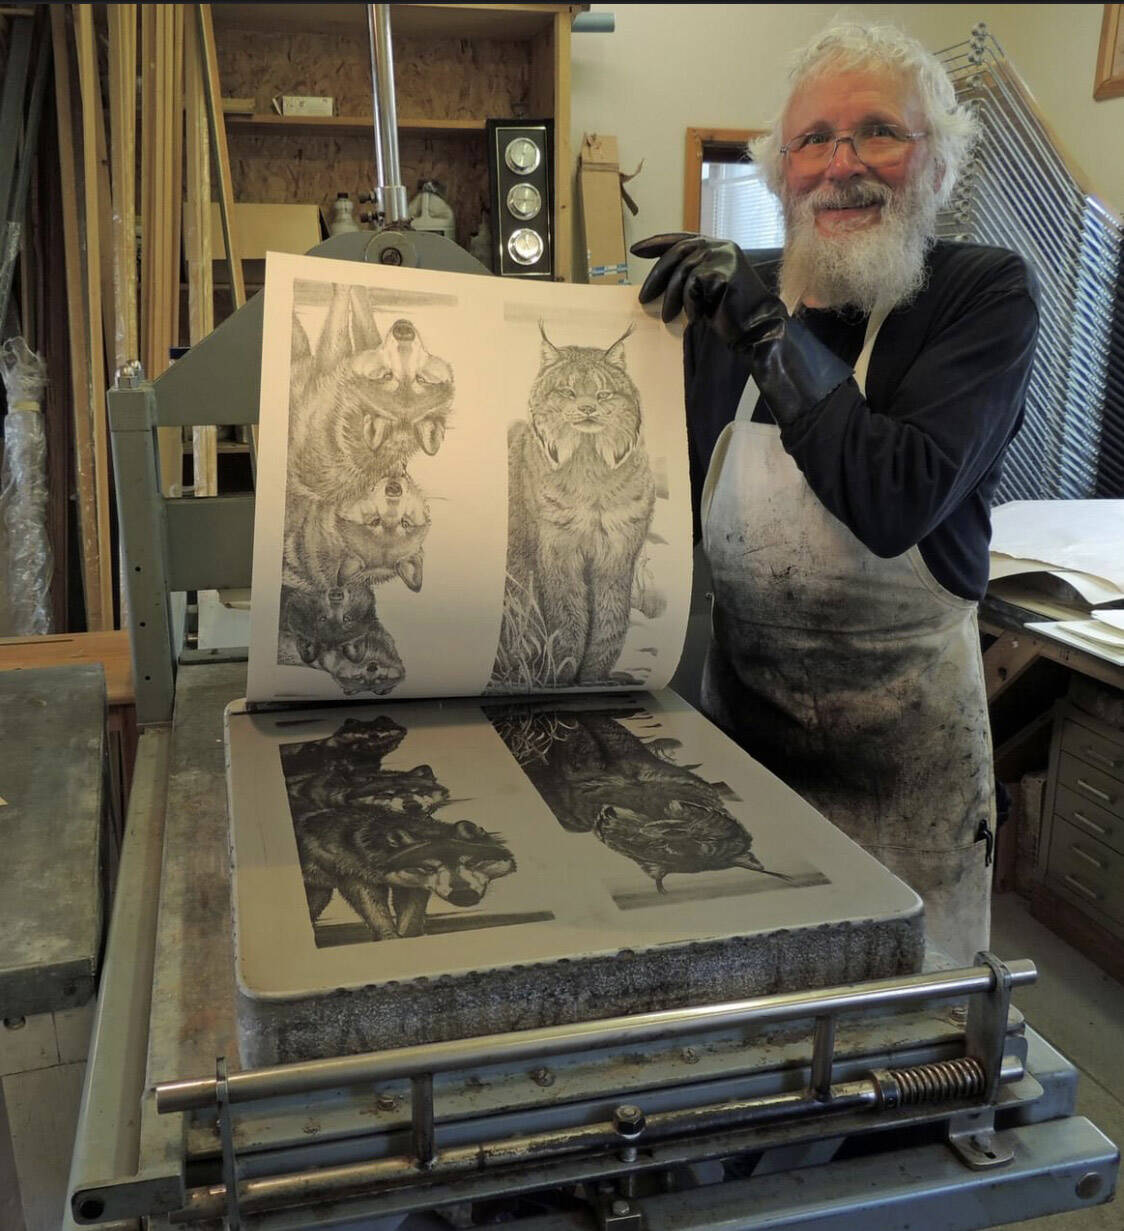 Gary Lyon creating lithographs in his home studio, 2022. (Photo provided by Gary Lyon)